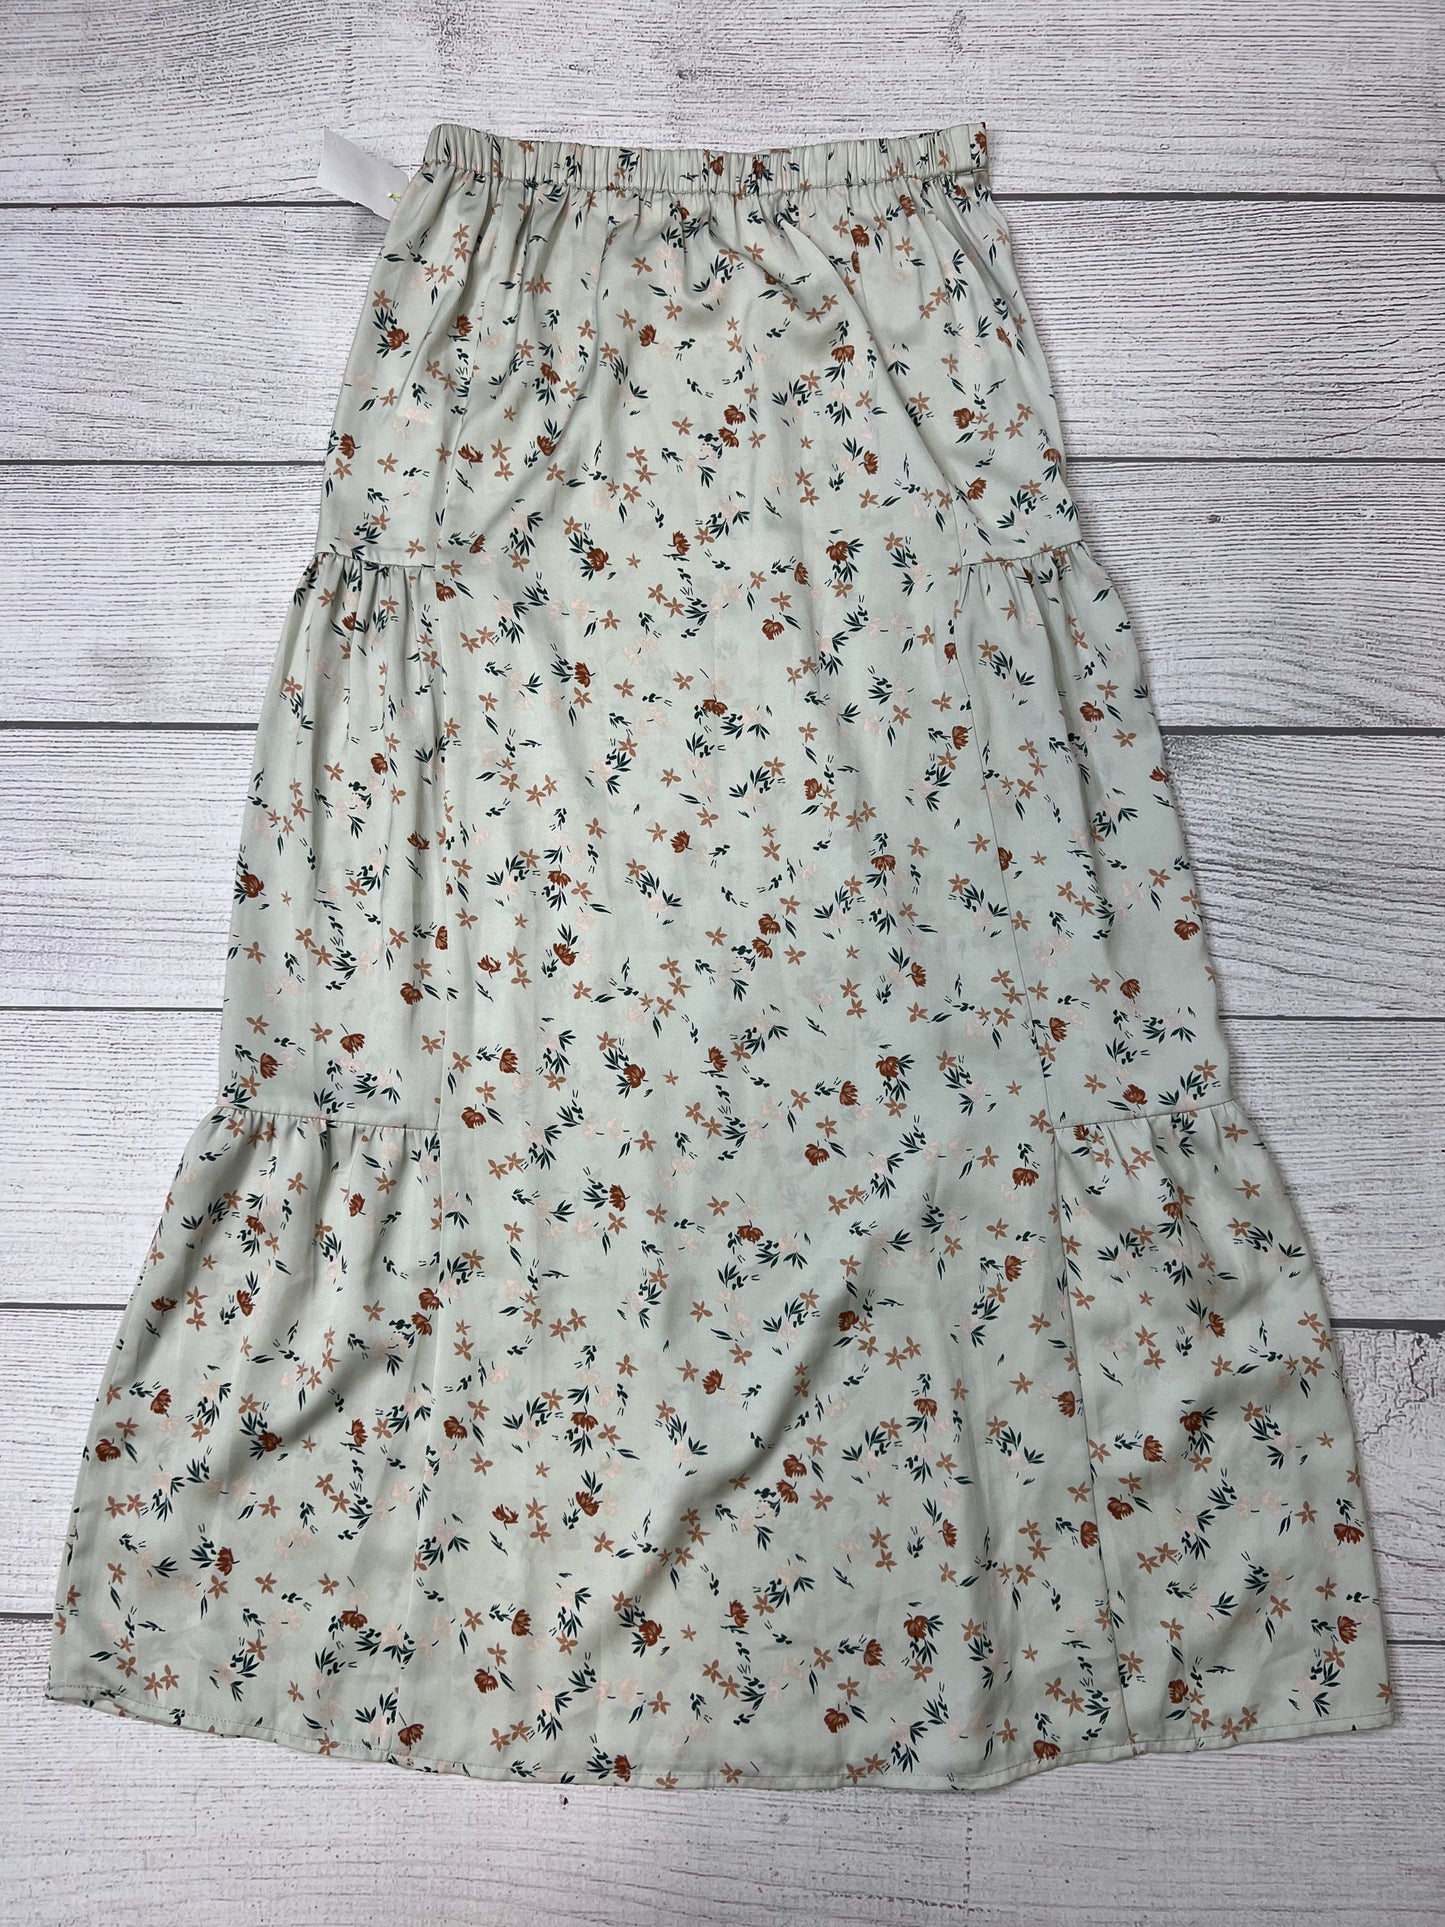 Floral Skirt Maxi SALTWATER LUXE  Size S